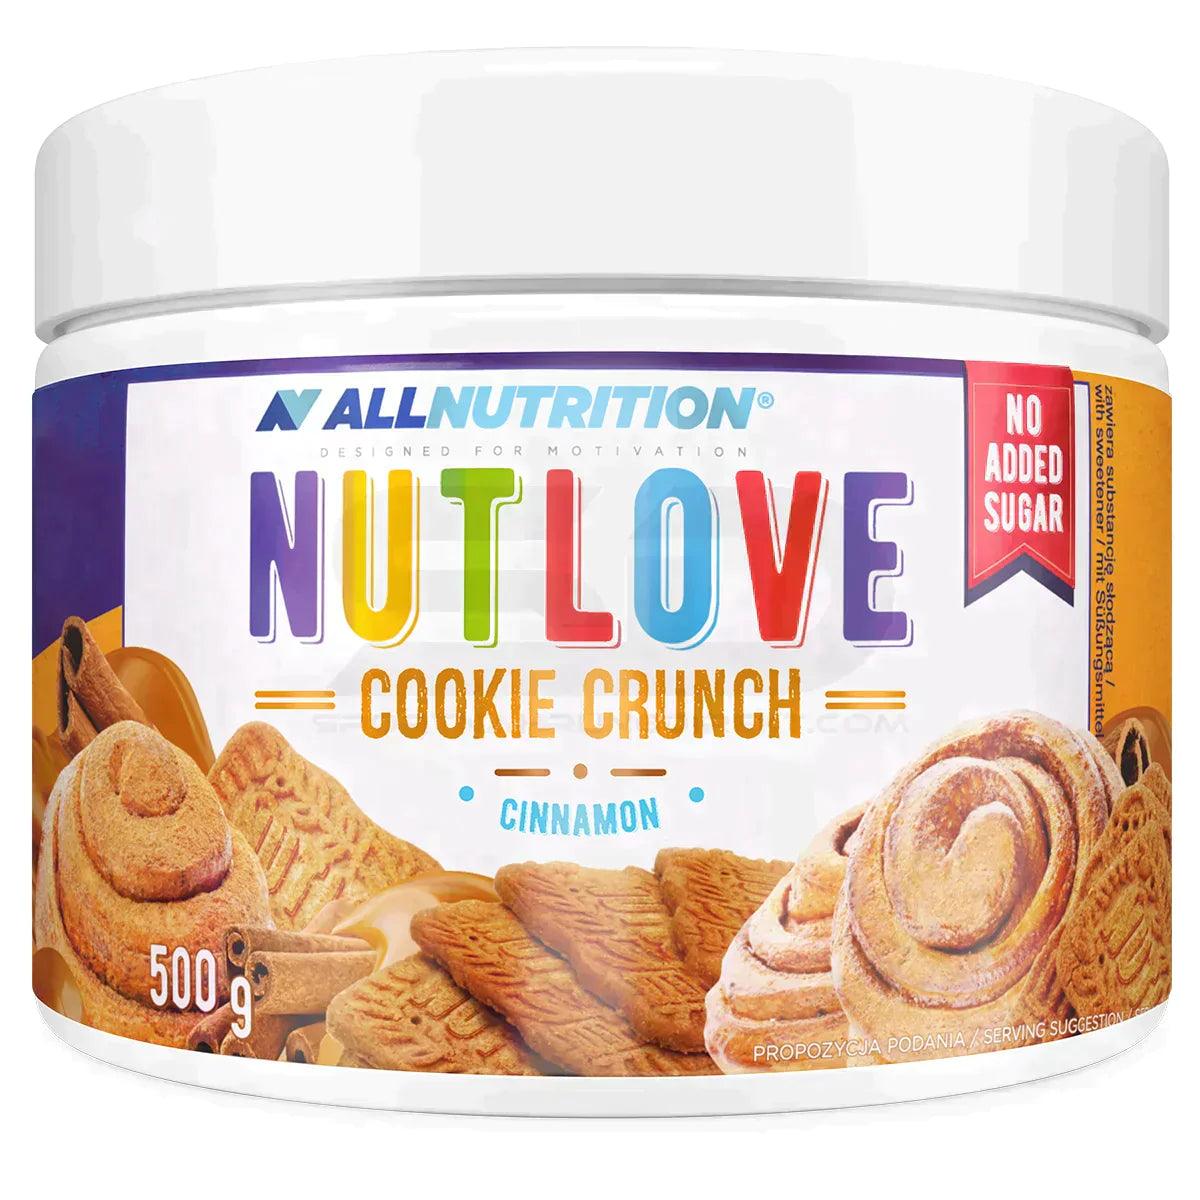 ALL NUTRITION NUT LOVE 500g - Supplement Support